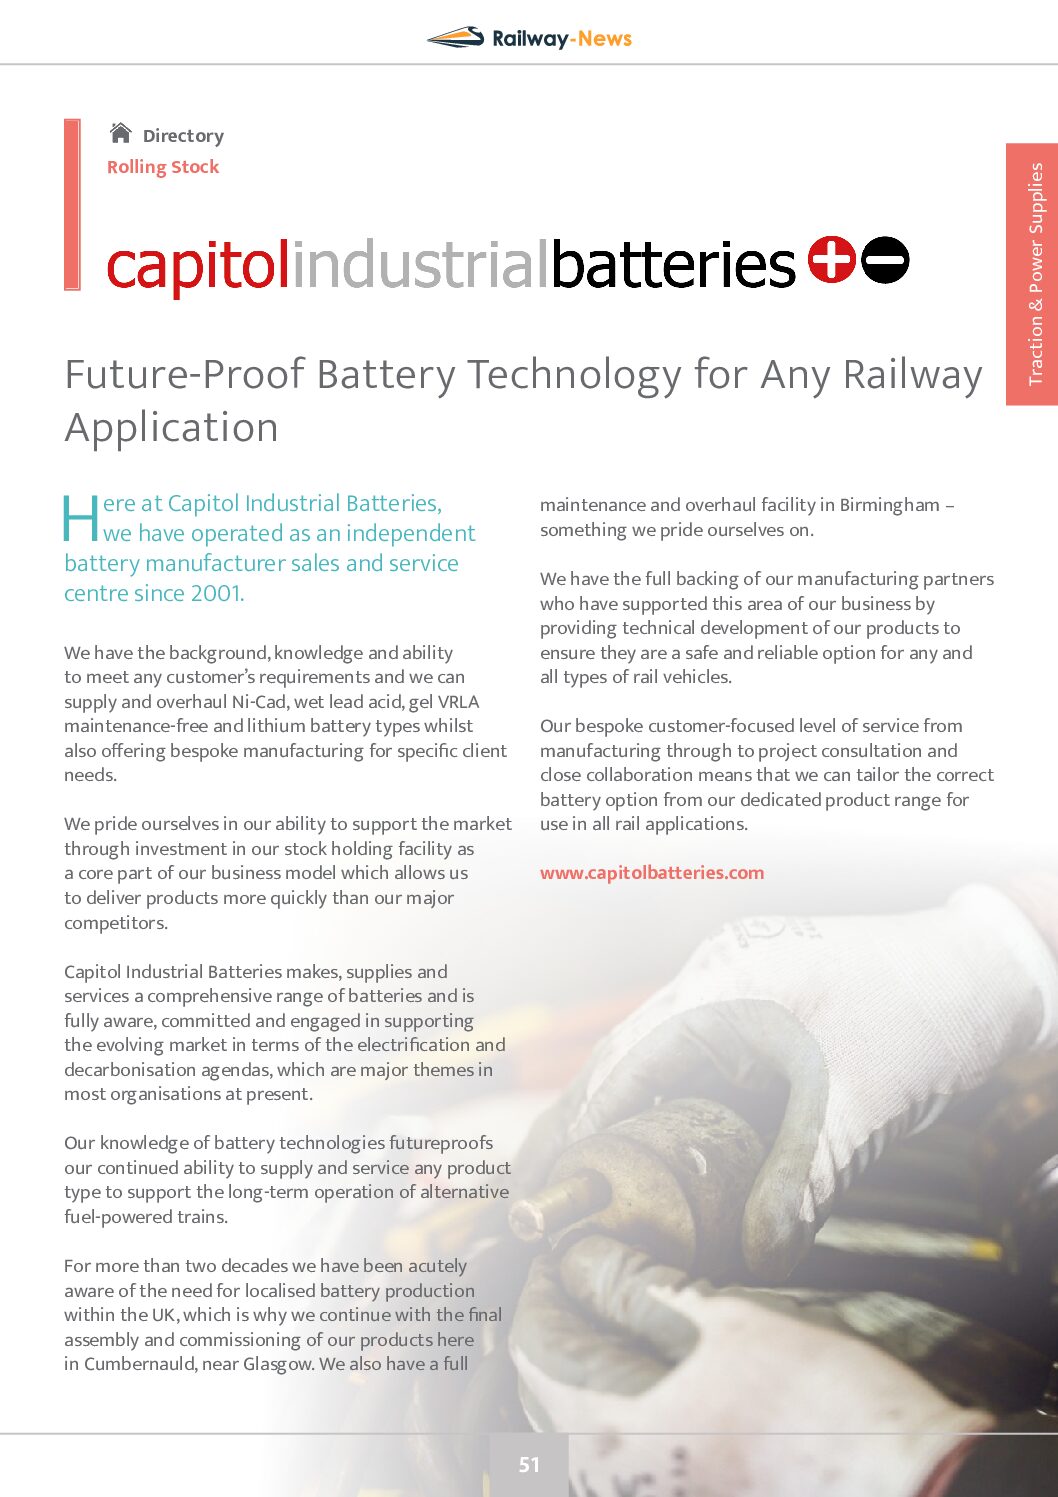 Future-Proof Battery Technology for Any Railway Application